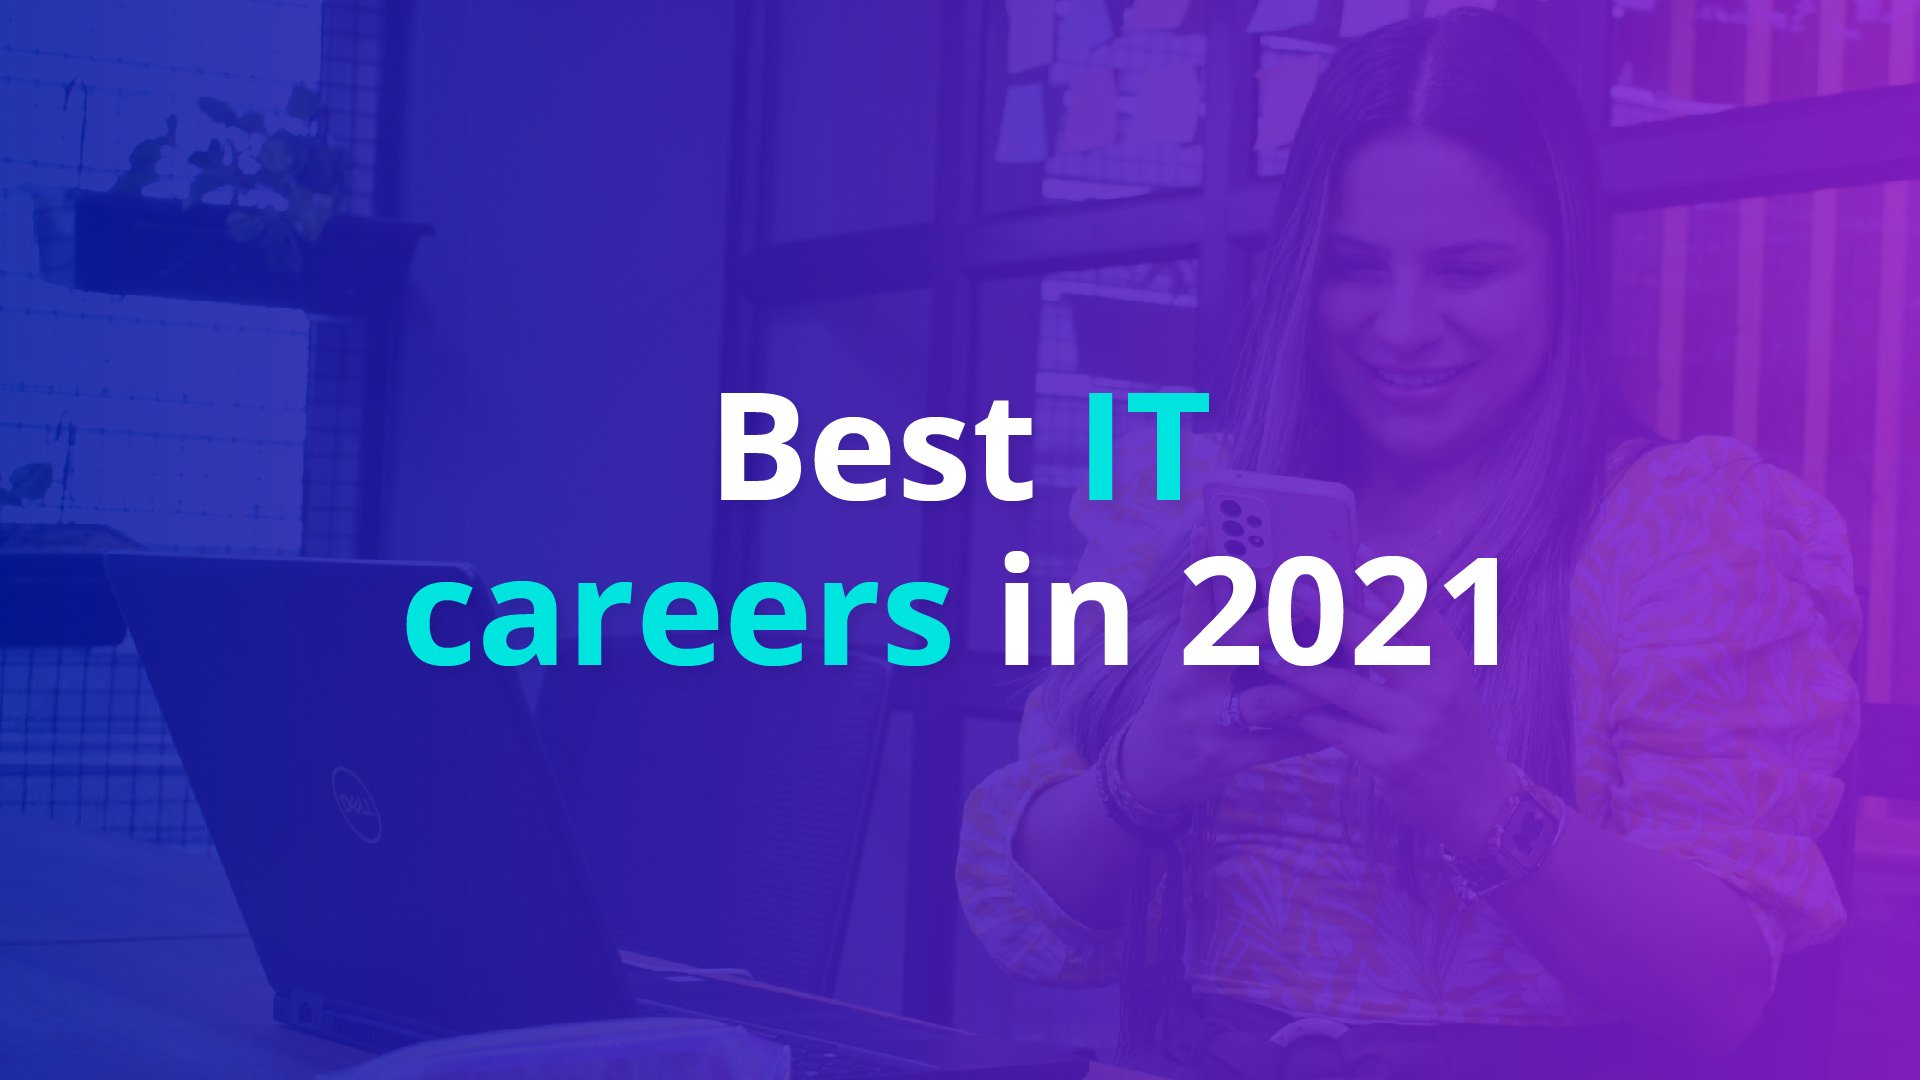 Best IT Careers in 2021: Which are the Most Competitive?